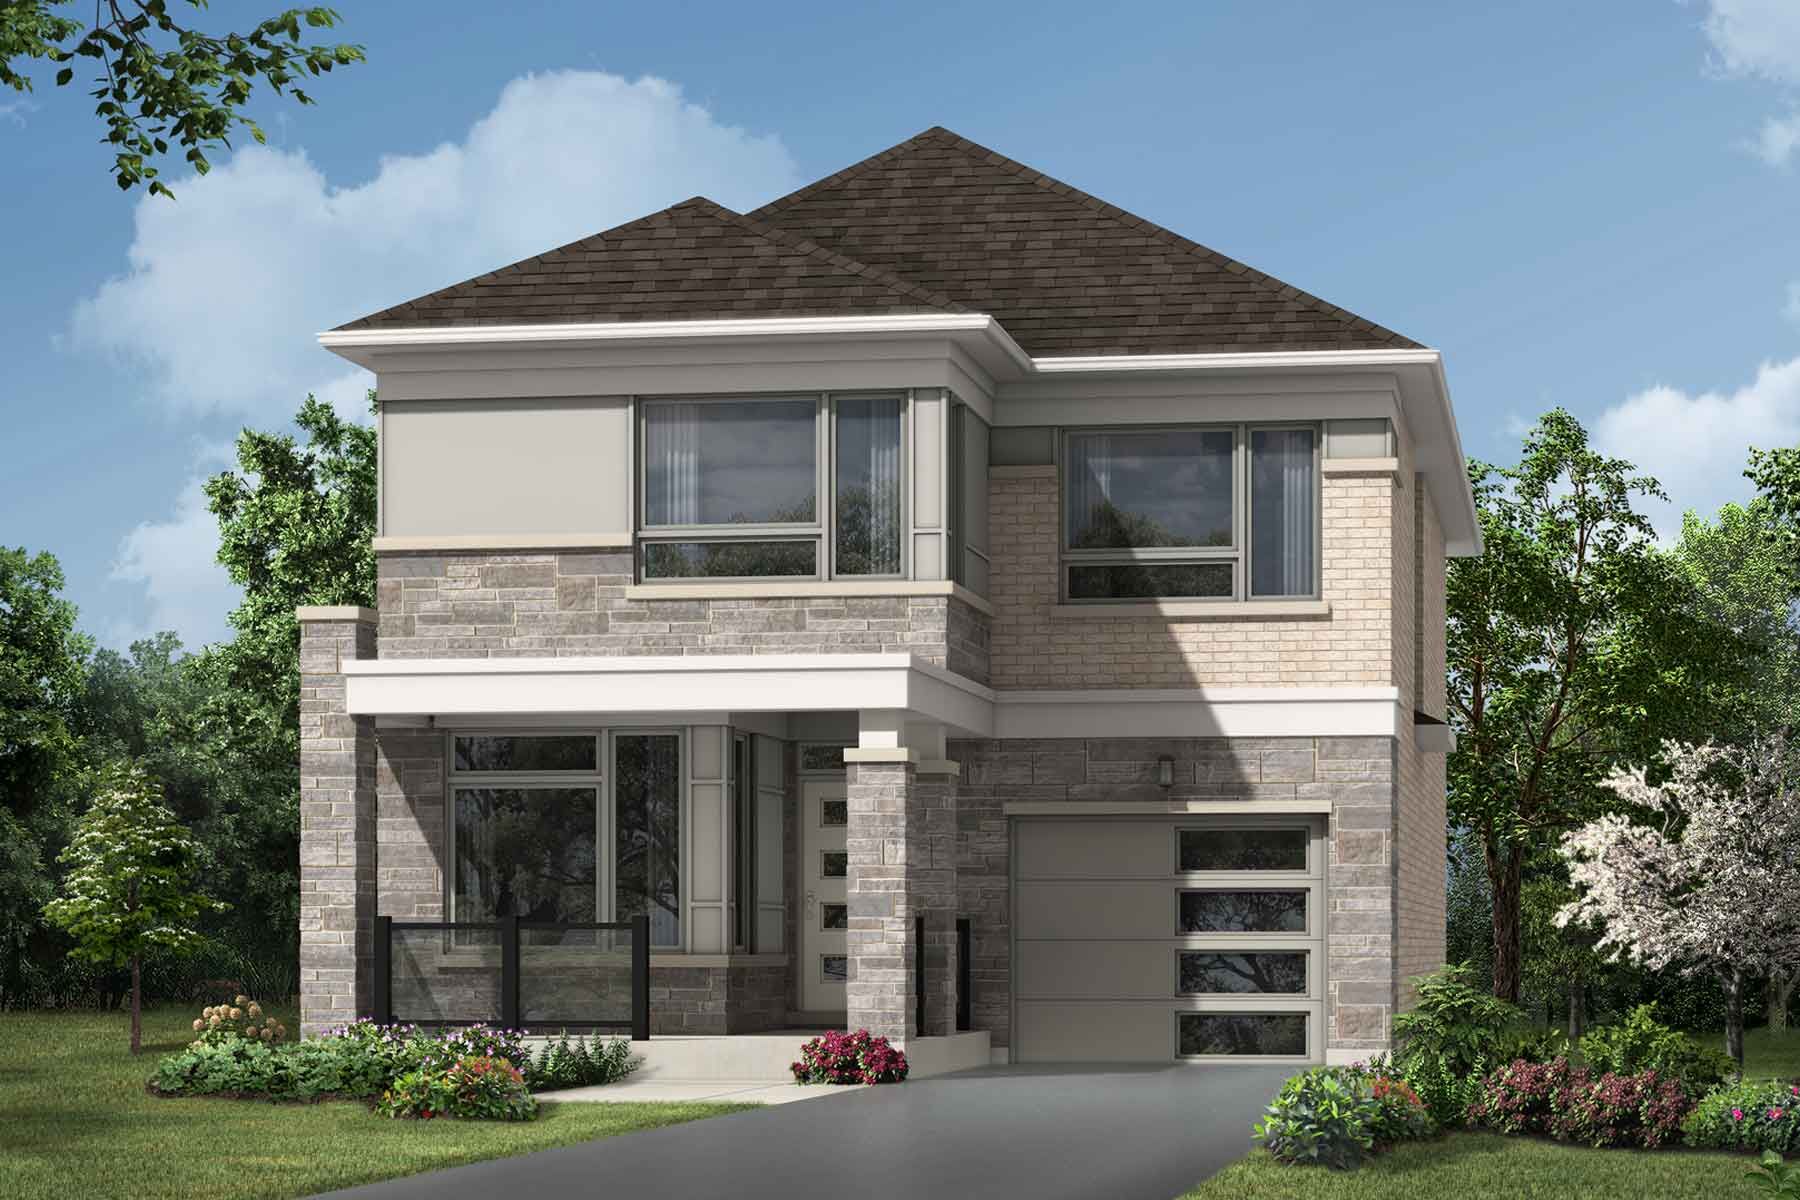 A Modern style single family home with a single car garage.